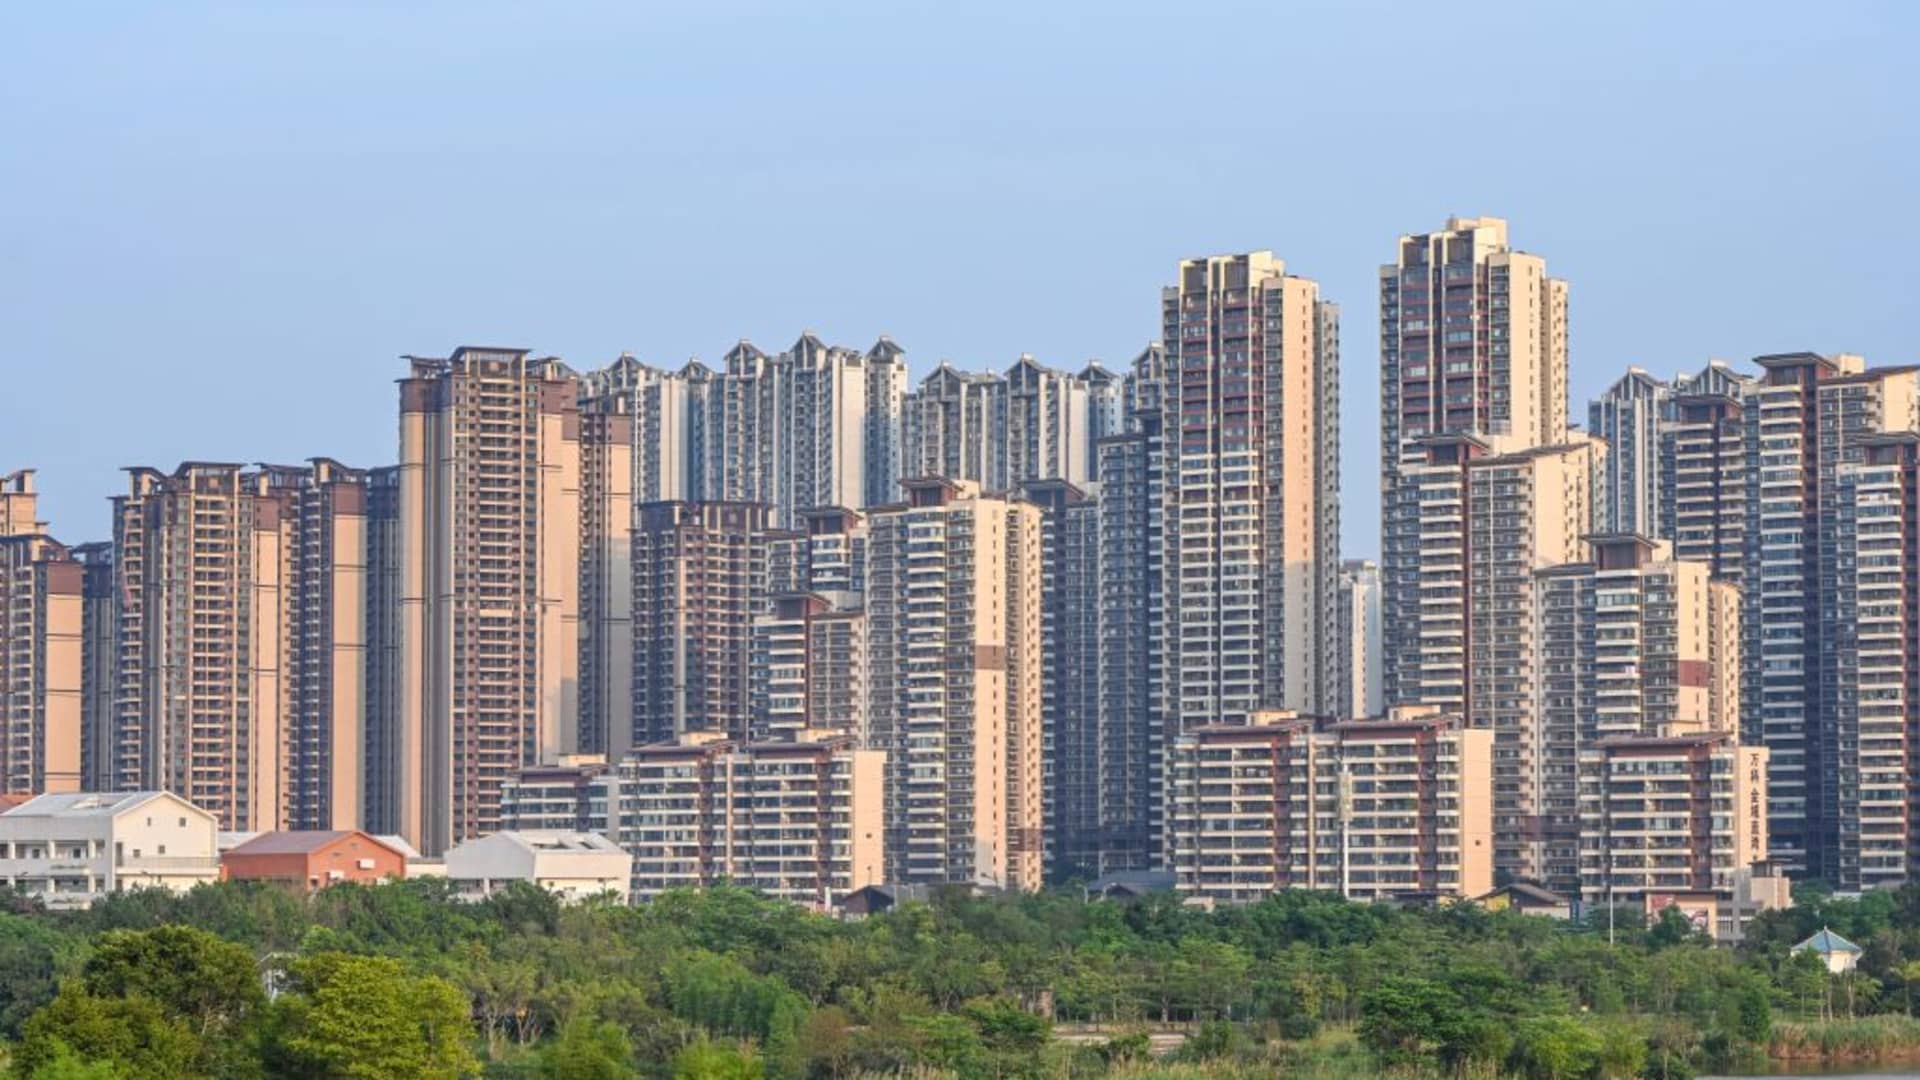 China’s real estate slump predicted to last for years, threatening to spill into the wider region